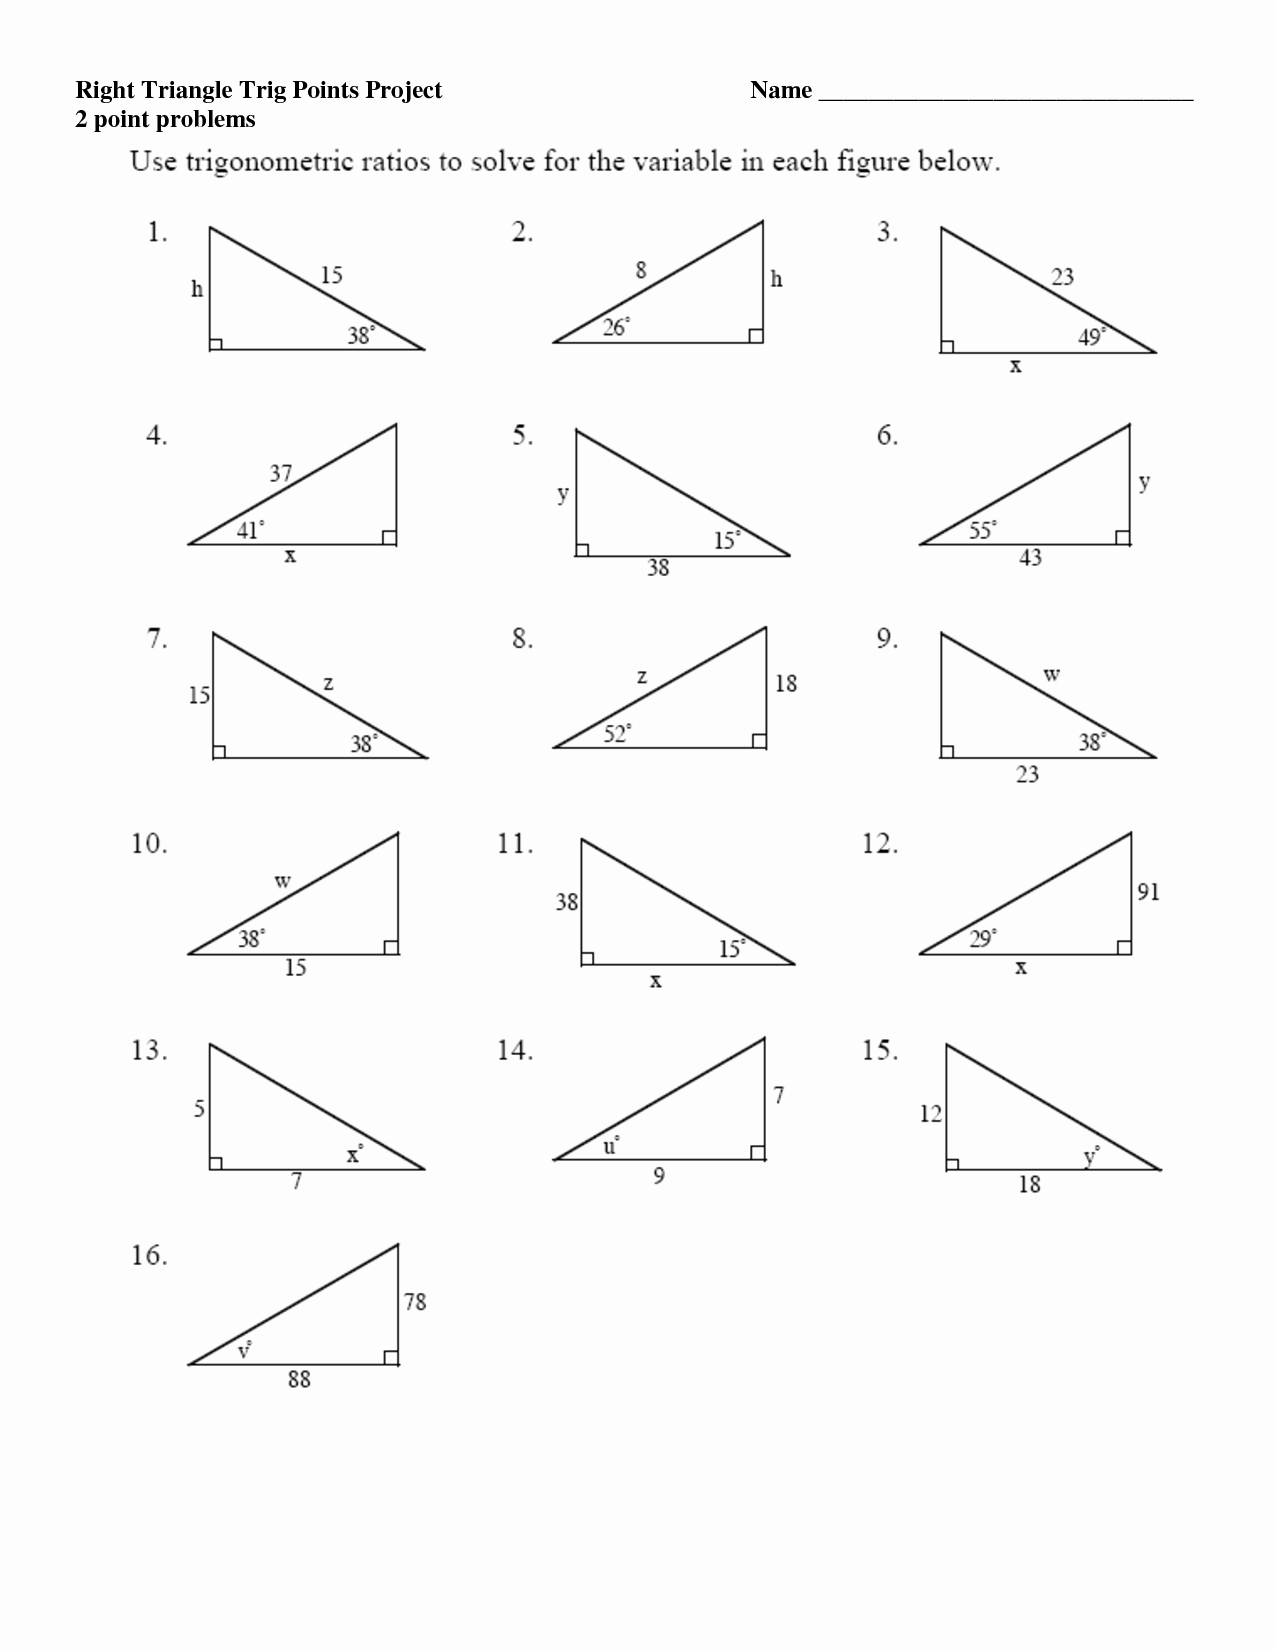 Right Triangle Trig Worksheet Luxury Using Trigonometric Ratios to Find Angles Worksheet